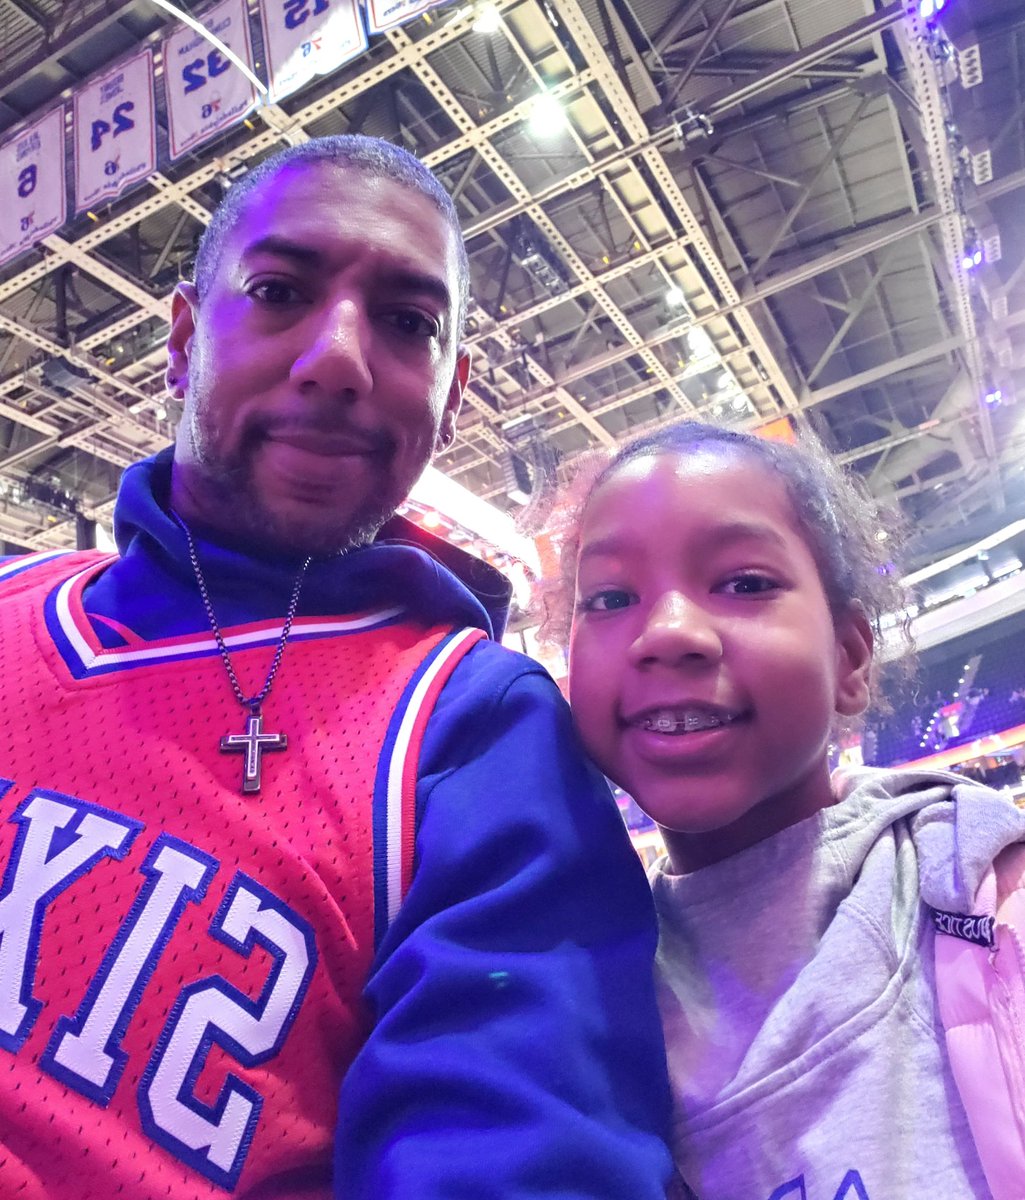 Having a great time with my daughter at the Sixers Game. #philaunite @IBX